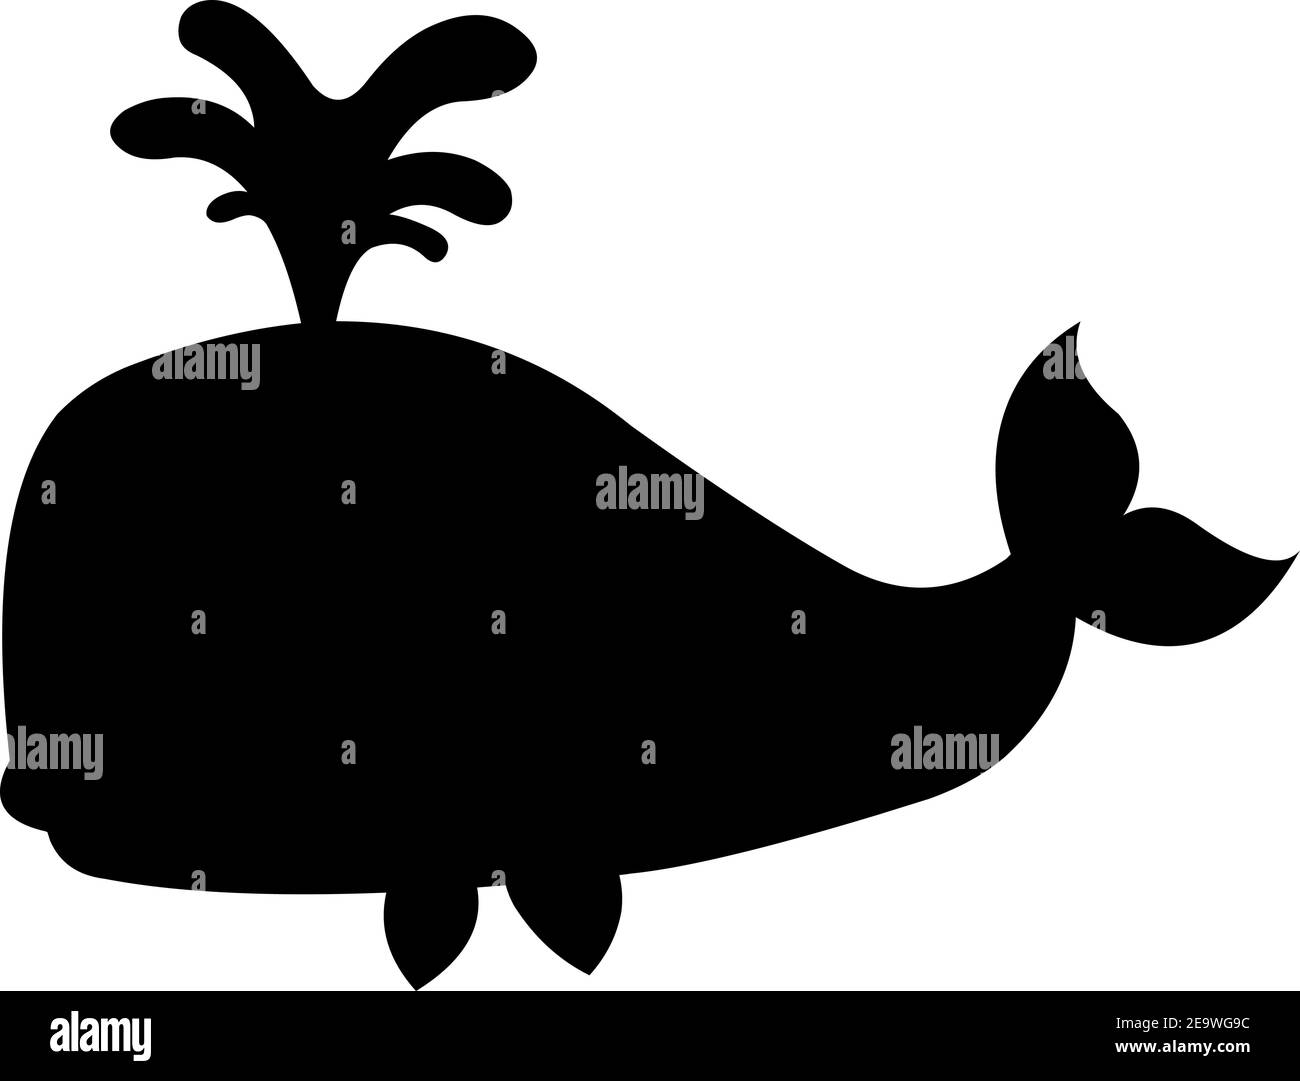 Vector illustration of the silhouette of a whale Stock Vector